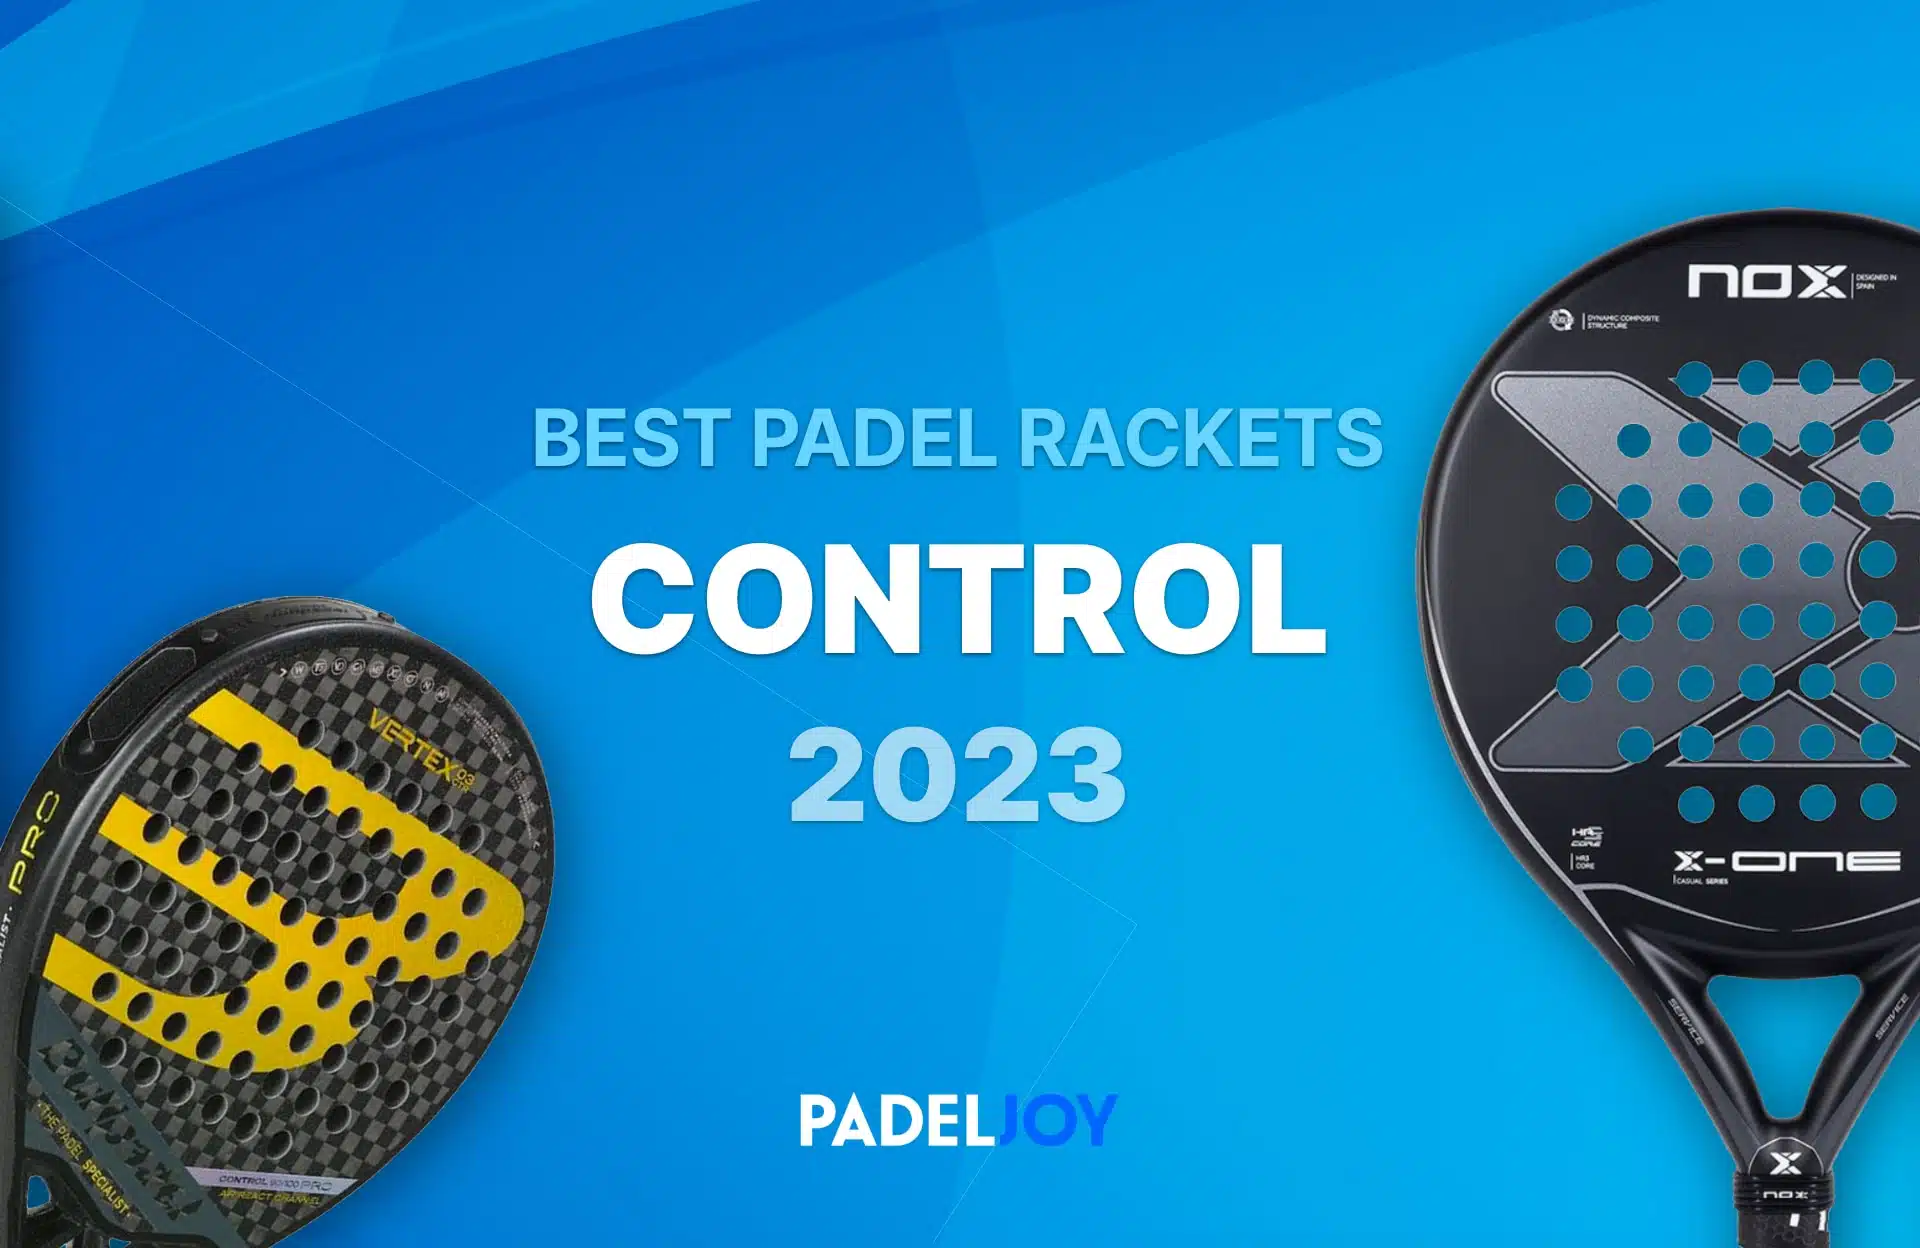 Best Padel Rackets for Control 2023: Top 3 Round Rackets